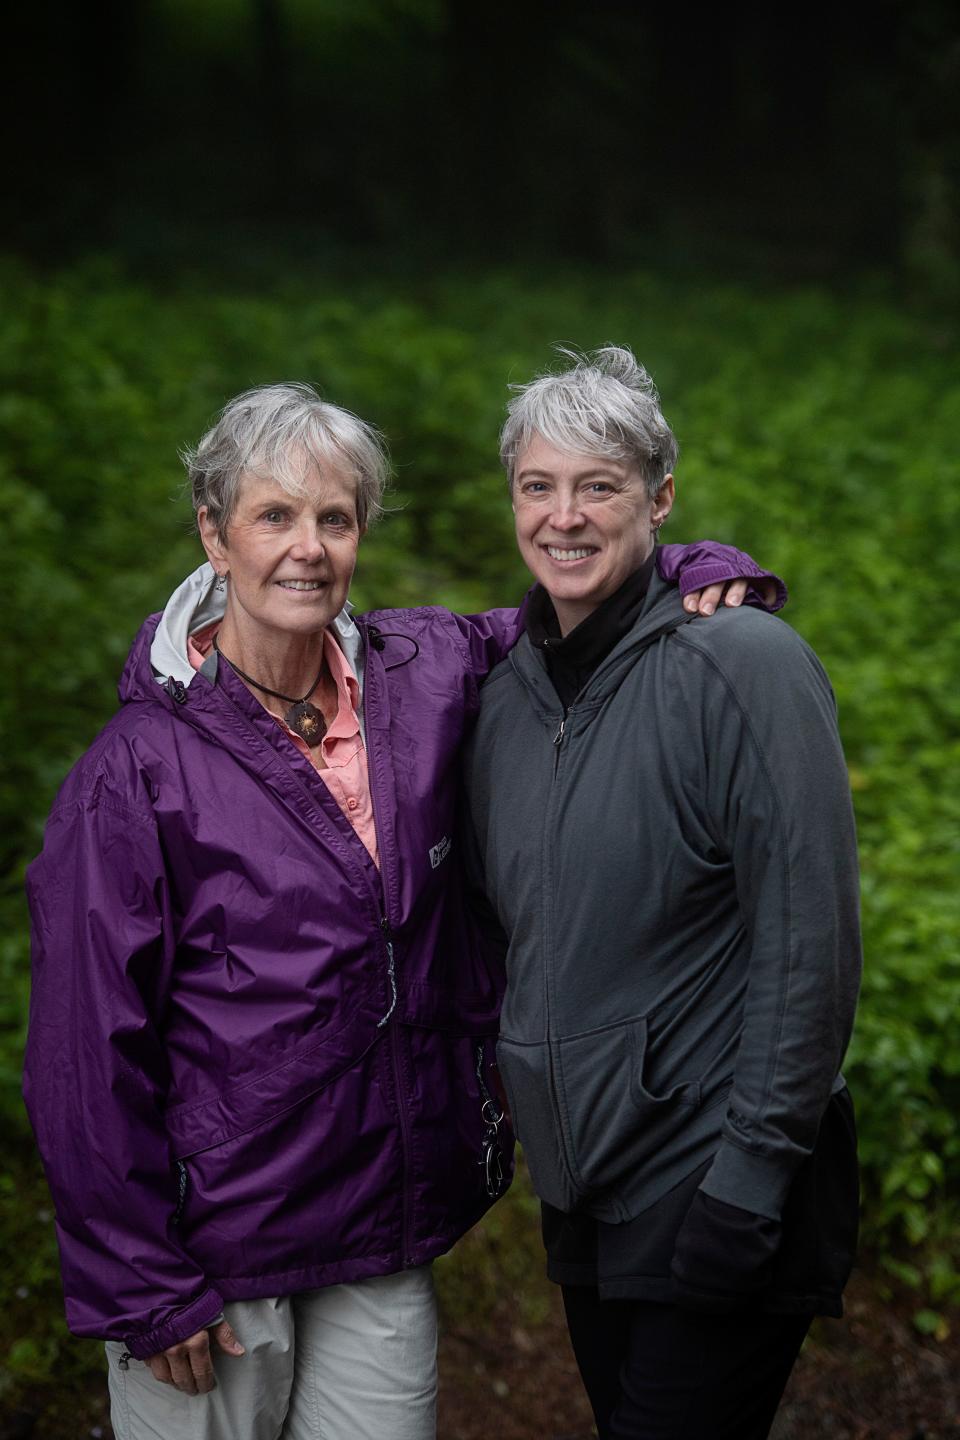 Lucretia Pintacuda, left, and Joanne Simmons will climb Mount Kilimanjaro to raise money for The Michael J. Fox Foundation for Parkinson’s Research.